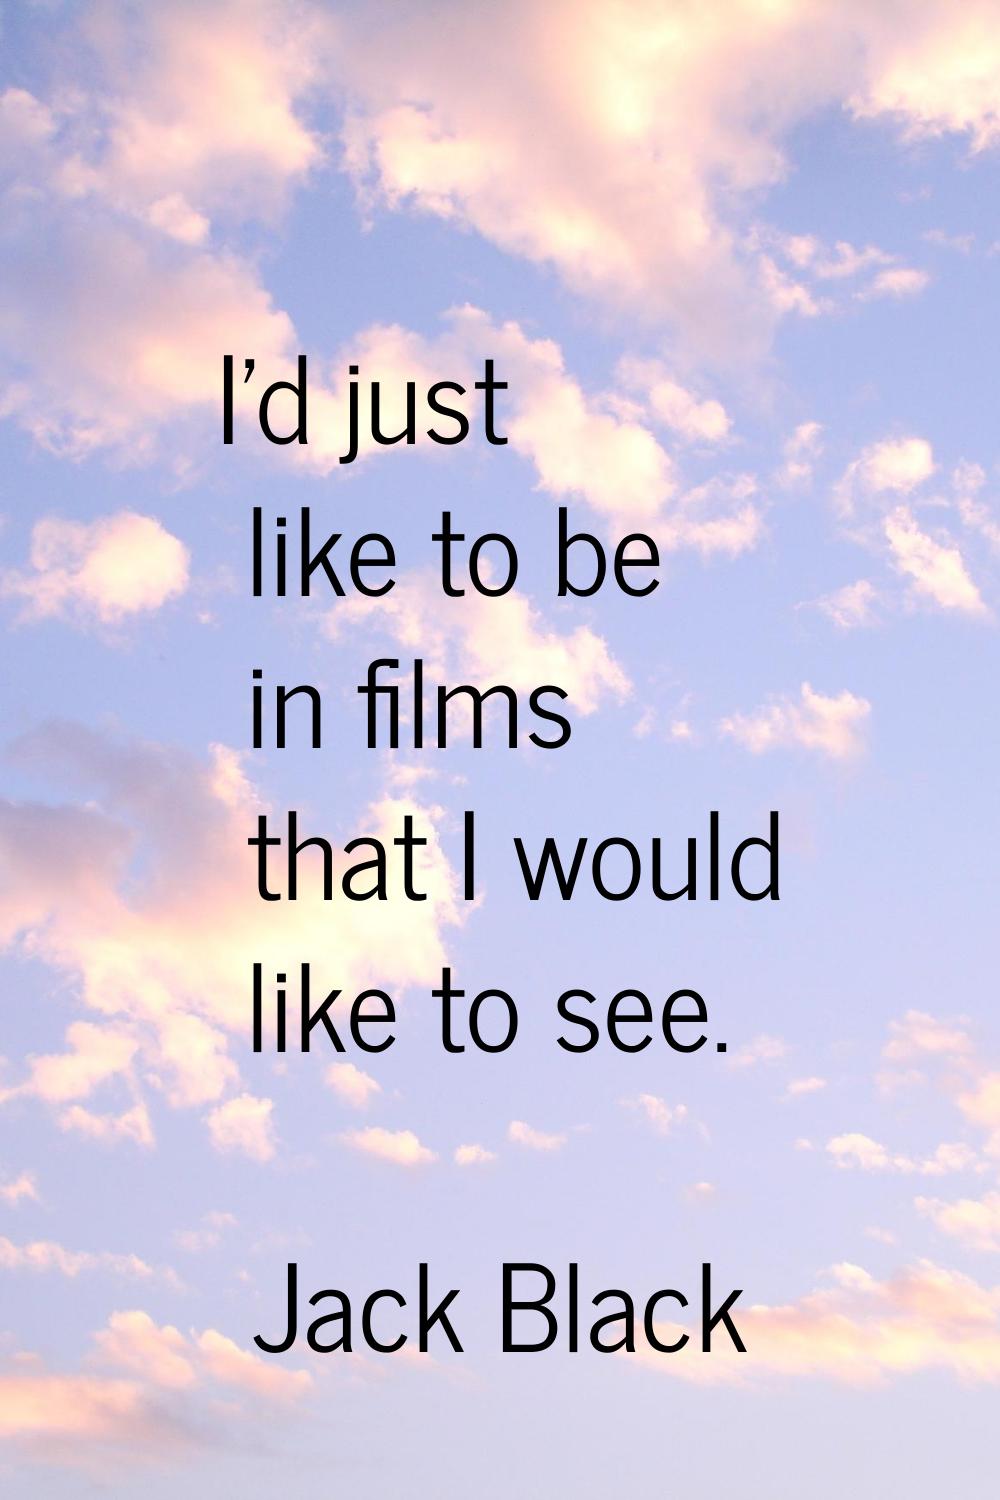 I'd just like to be in films that I would like to see.